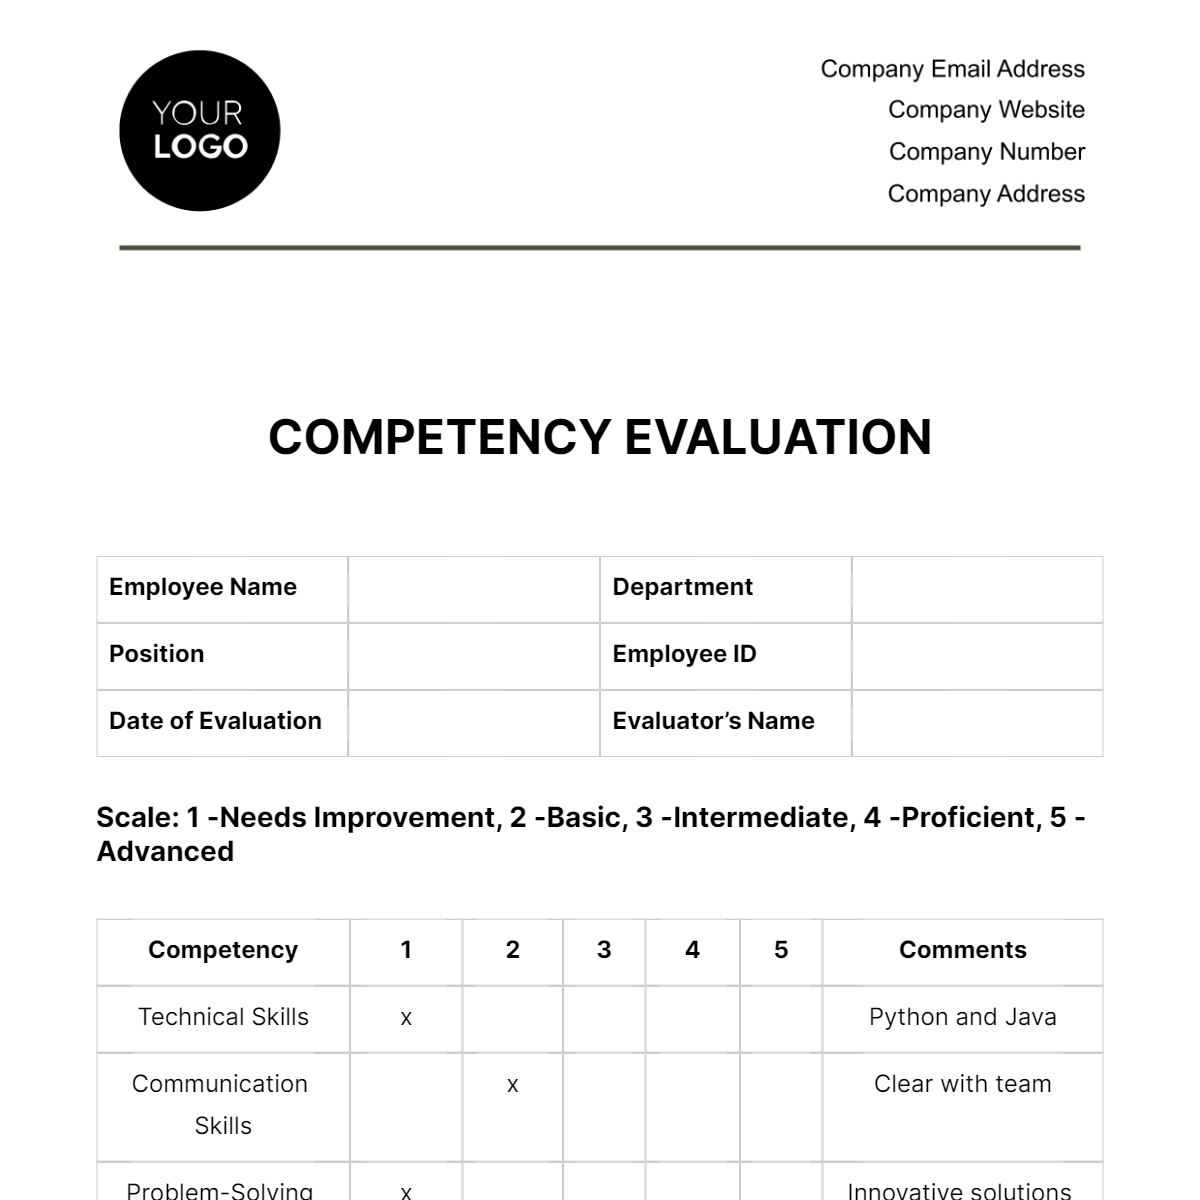 FREE HR Templates Templates & Examples - Download in Word, Google Docs ...